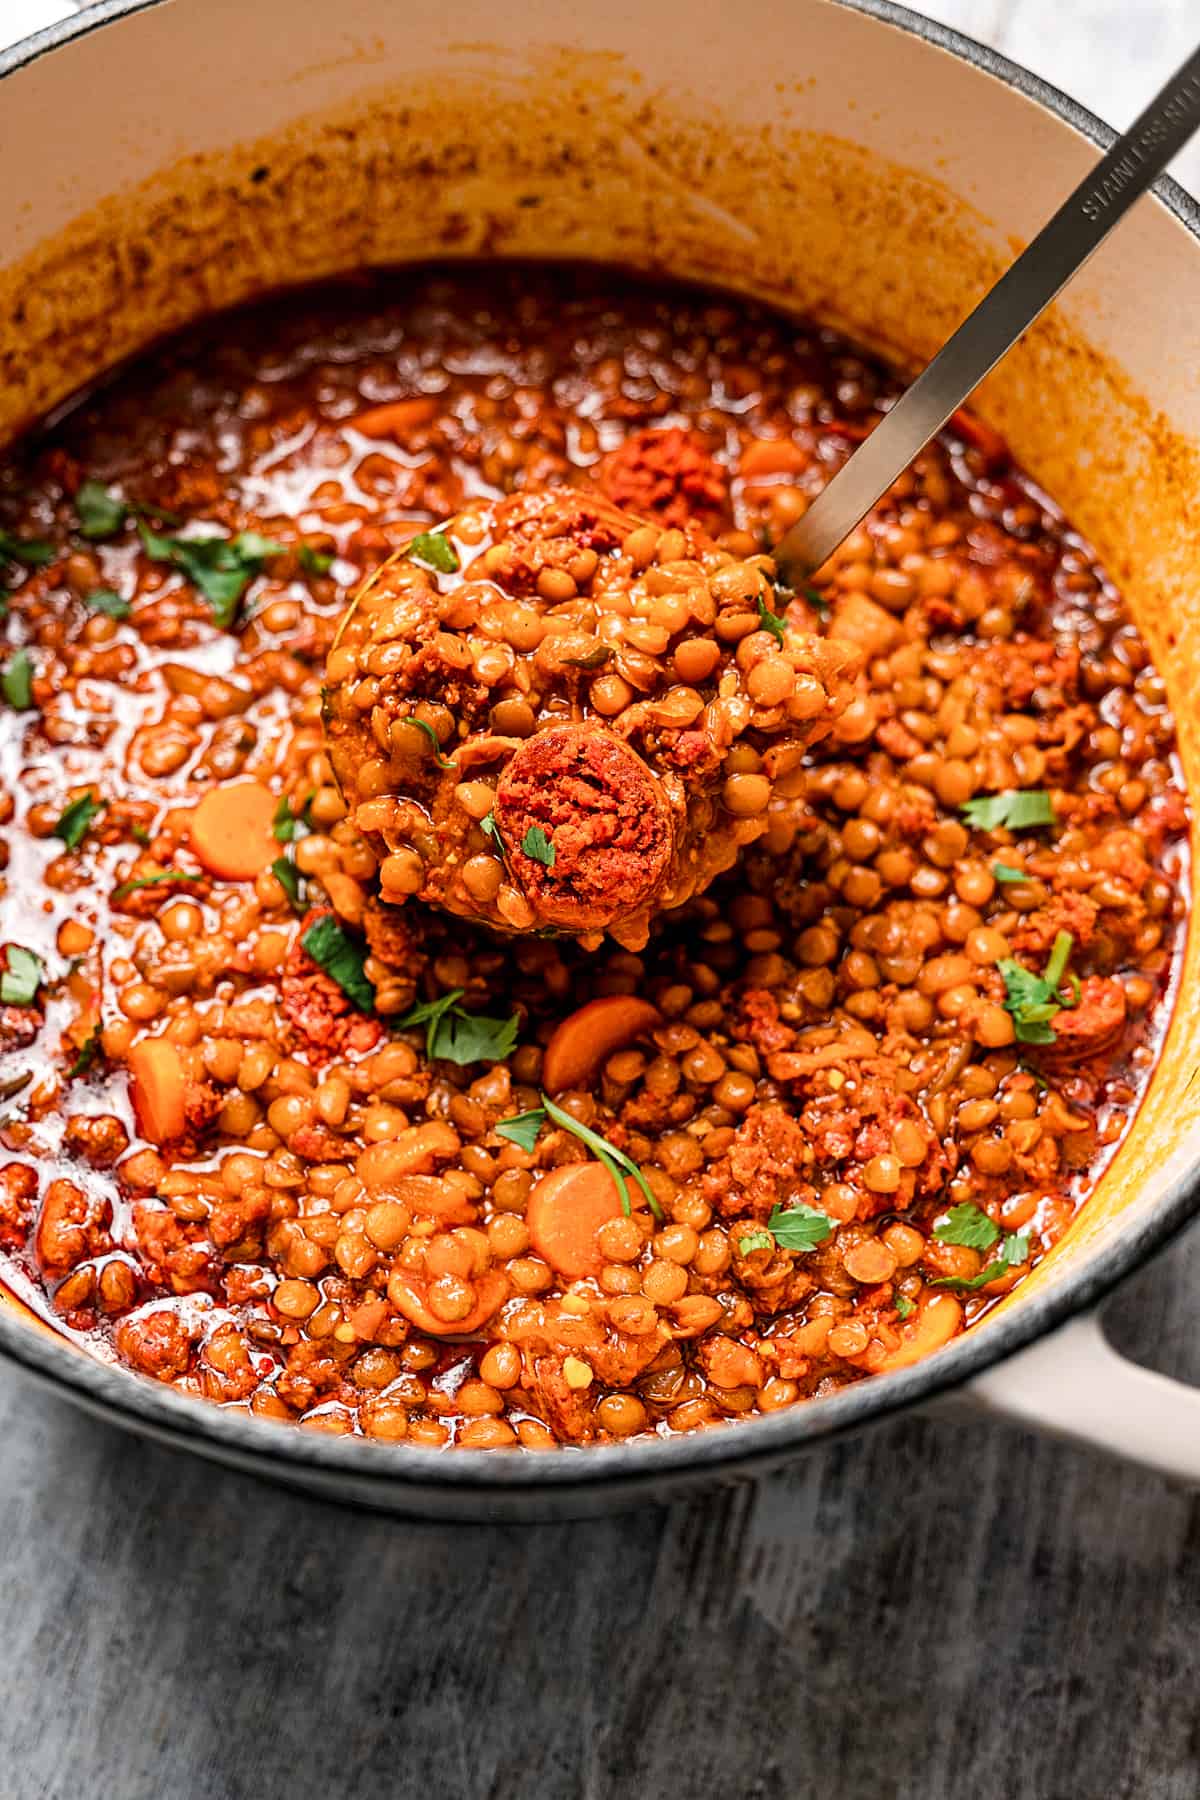 A pot of lentils and other soup ingredients.